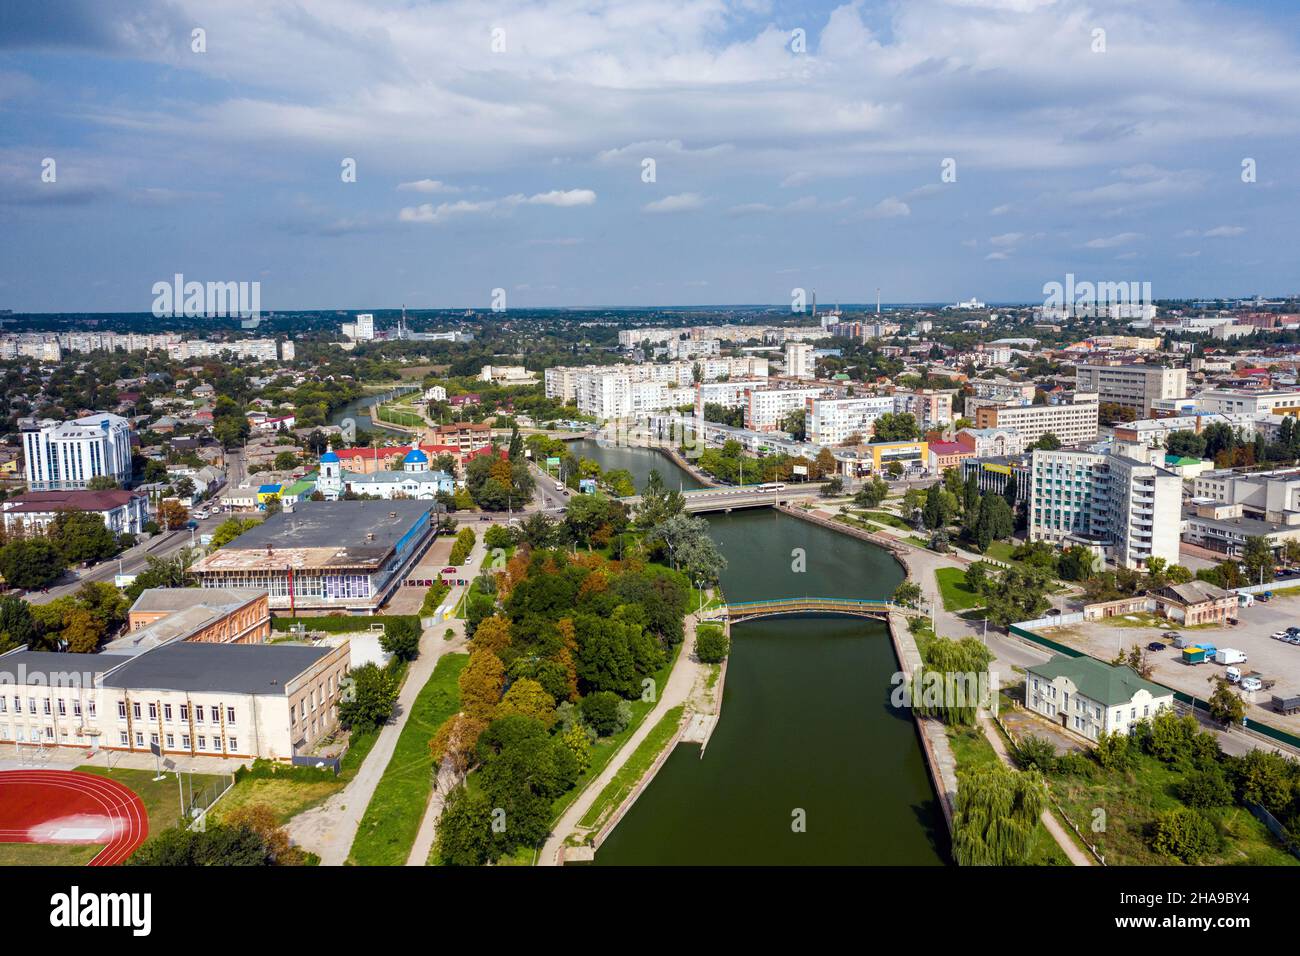 The Kropyvnytskyi old name Kirovograd Ukraine aerial view central part of the city Stock Photo